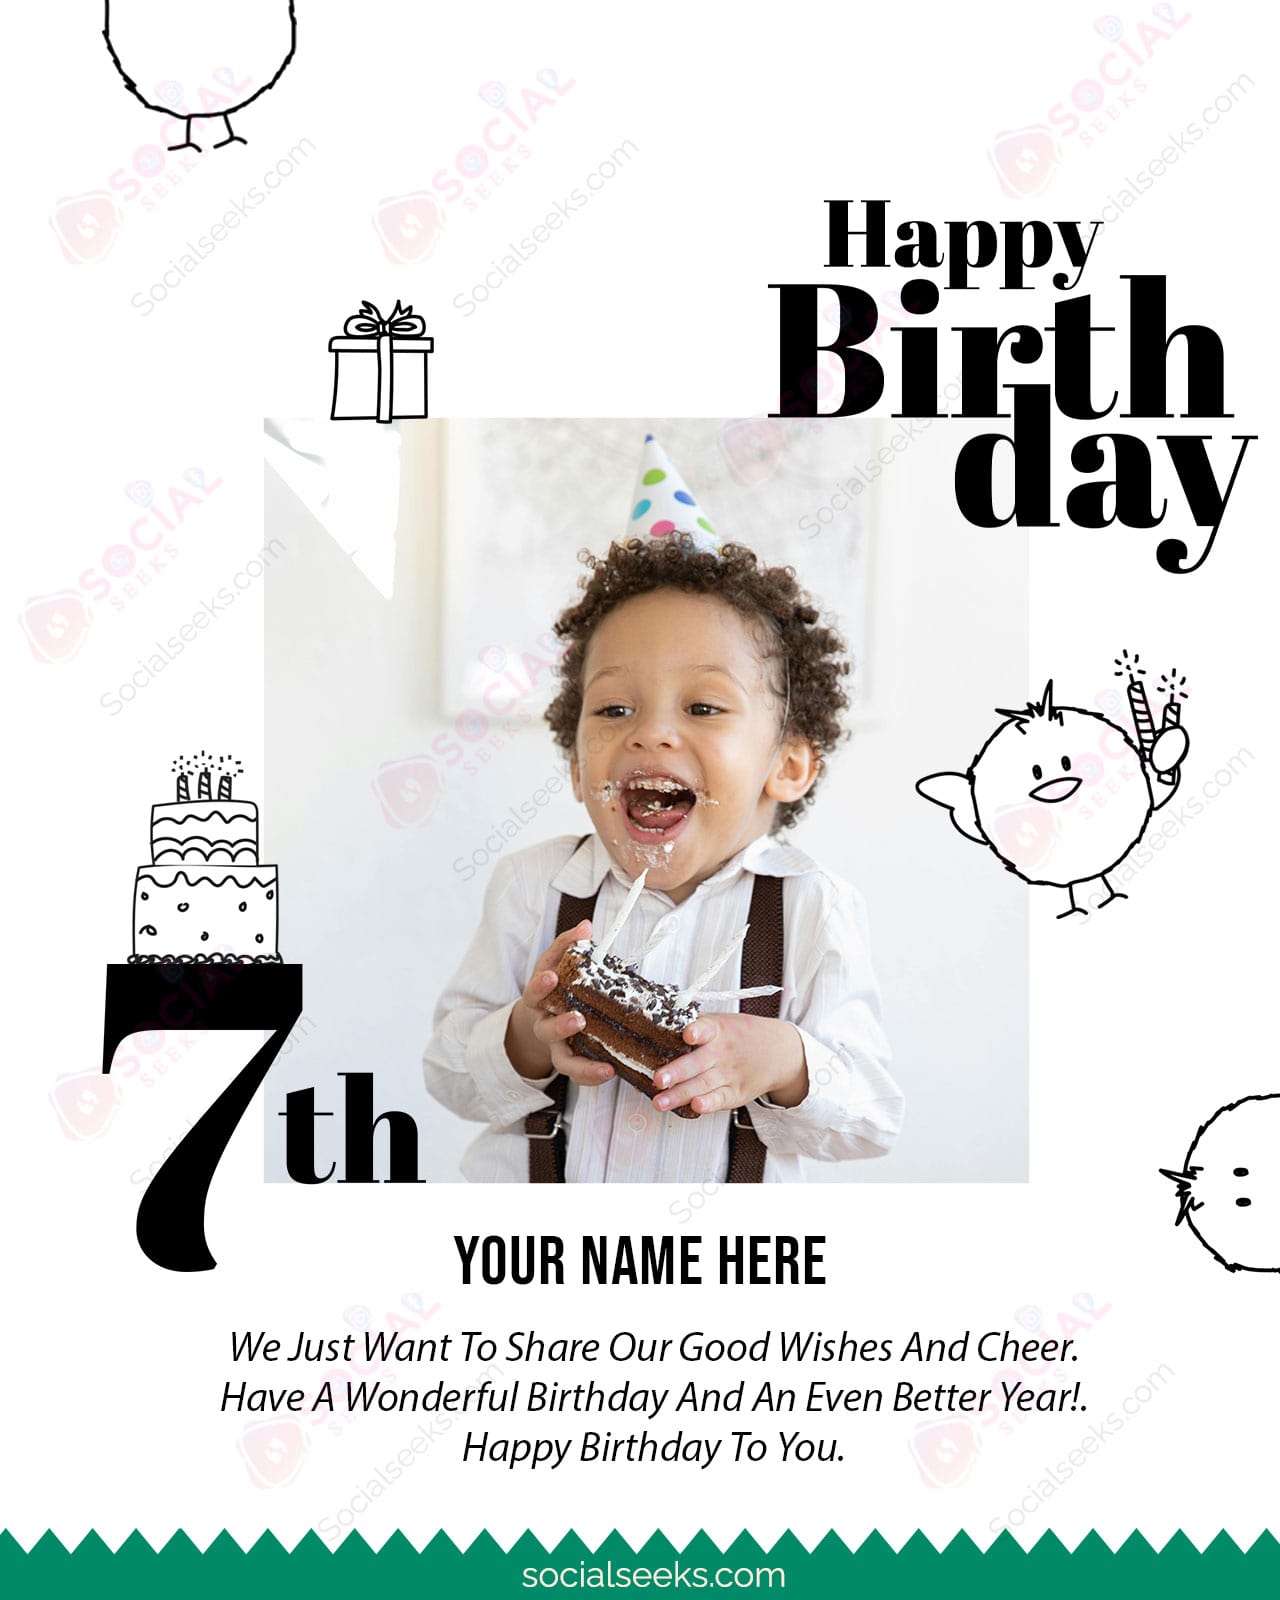 7 Birthday Wishes Photo Frame With Your Name